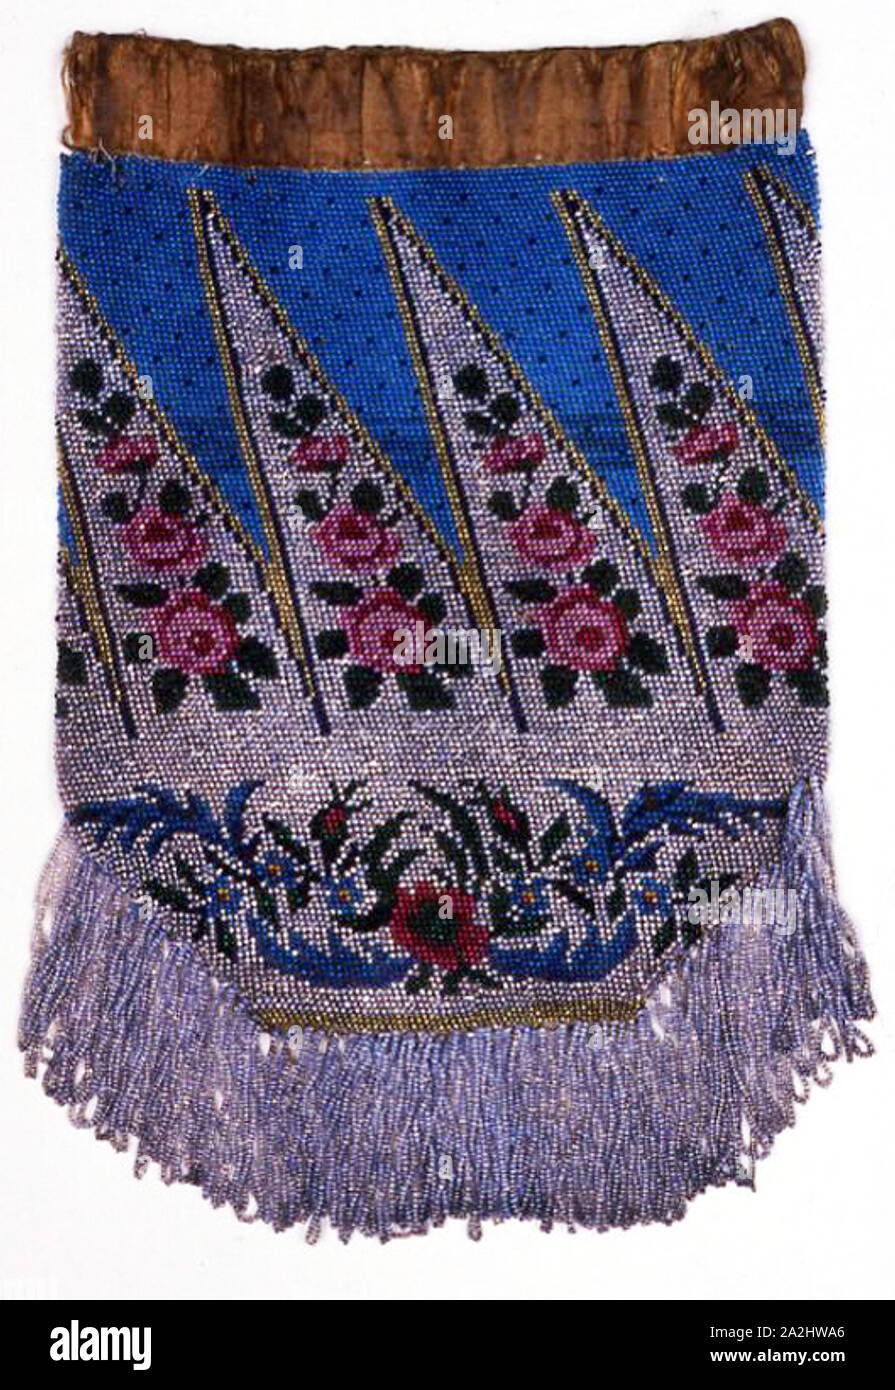 Bag, c. 1839, United States, North America, Silk, crossed knitting with glass beads, silk and glass beads, loop fringe, band: silk, plain weave, 22.3 x 15 cm (8 3/4 x 5 7/8 in Stock Photo